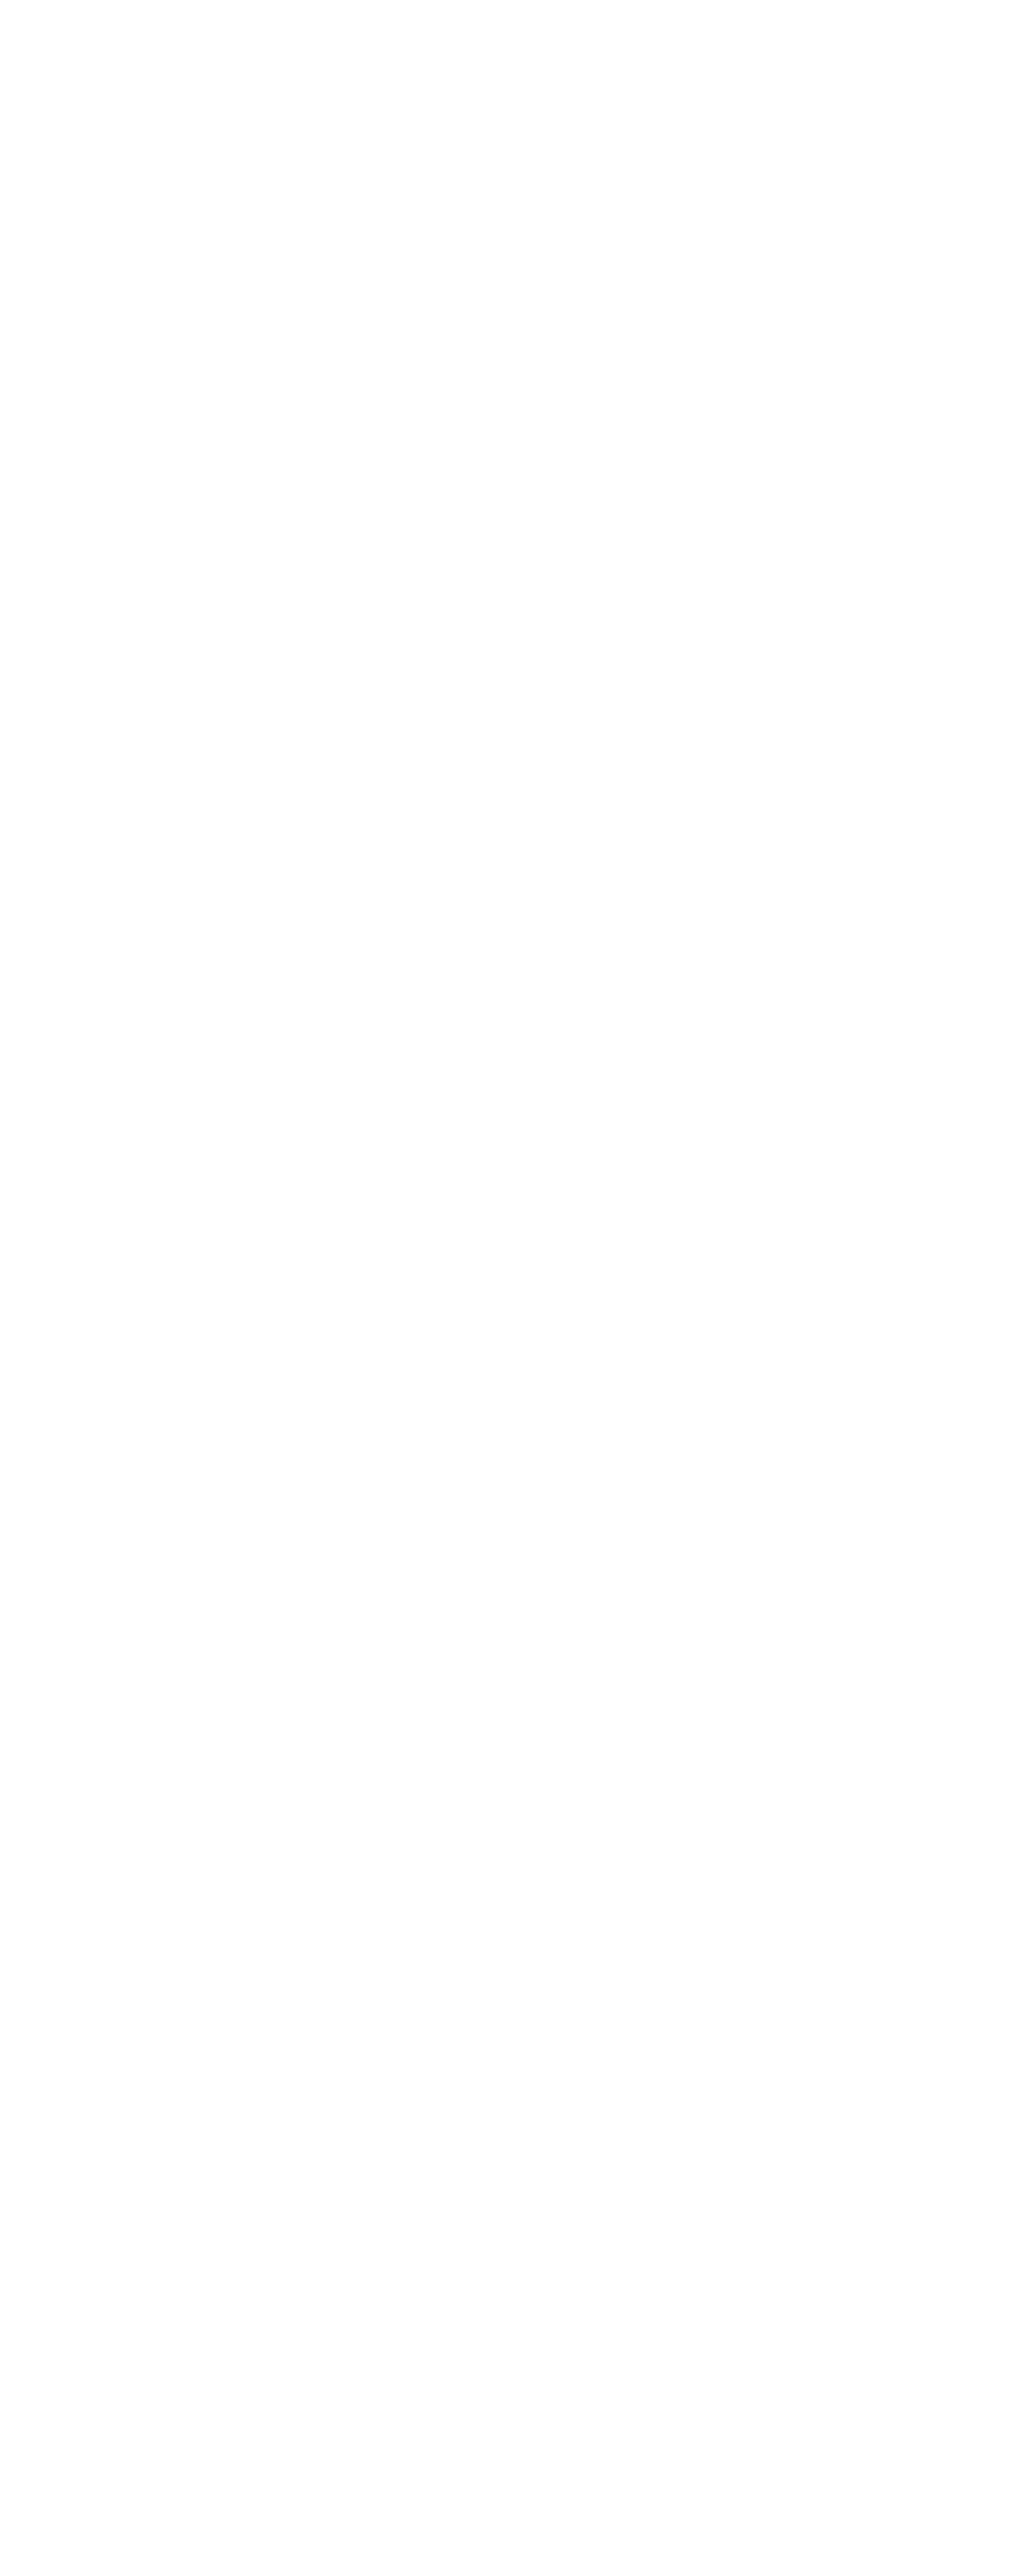 Code of the sea no R surfboards